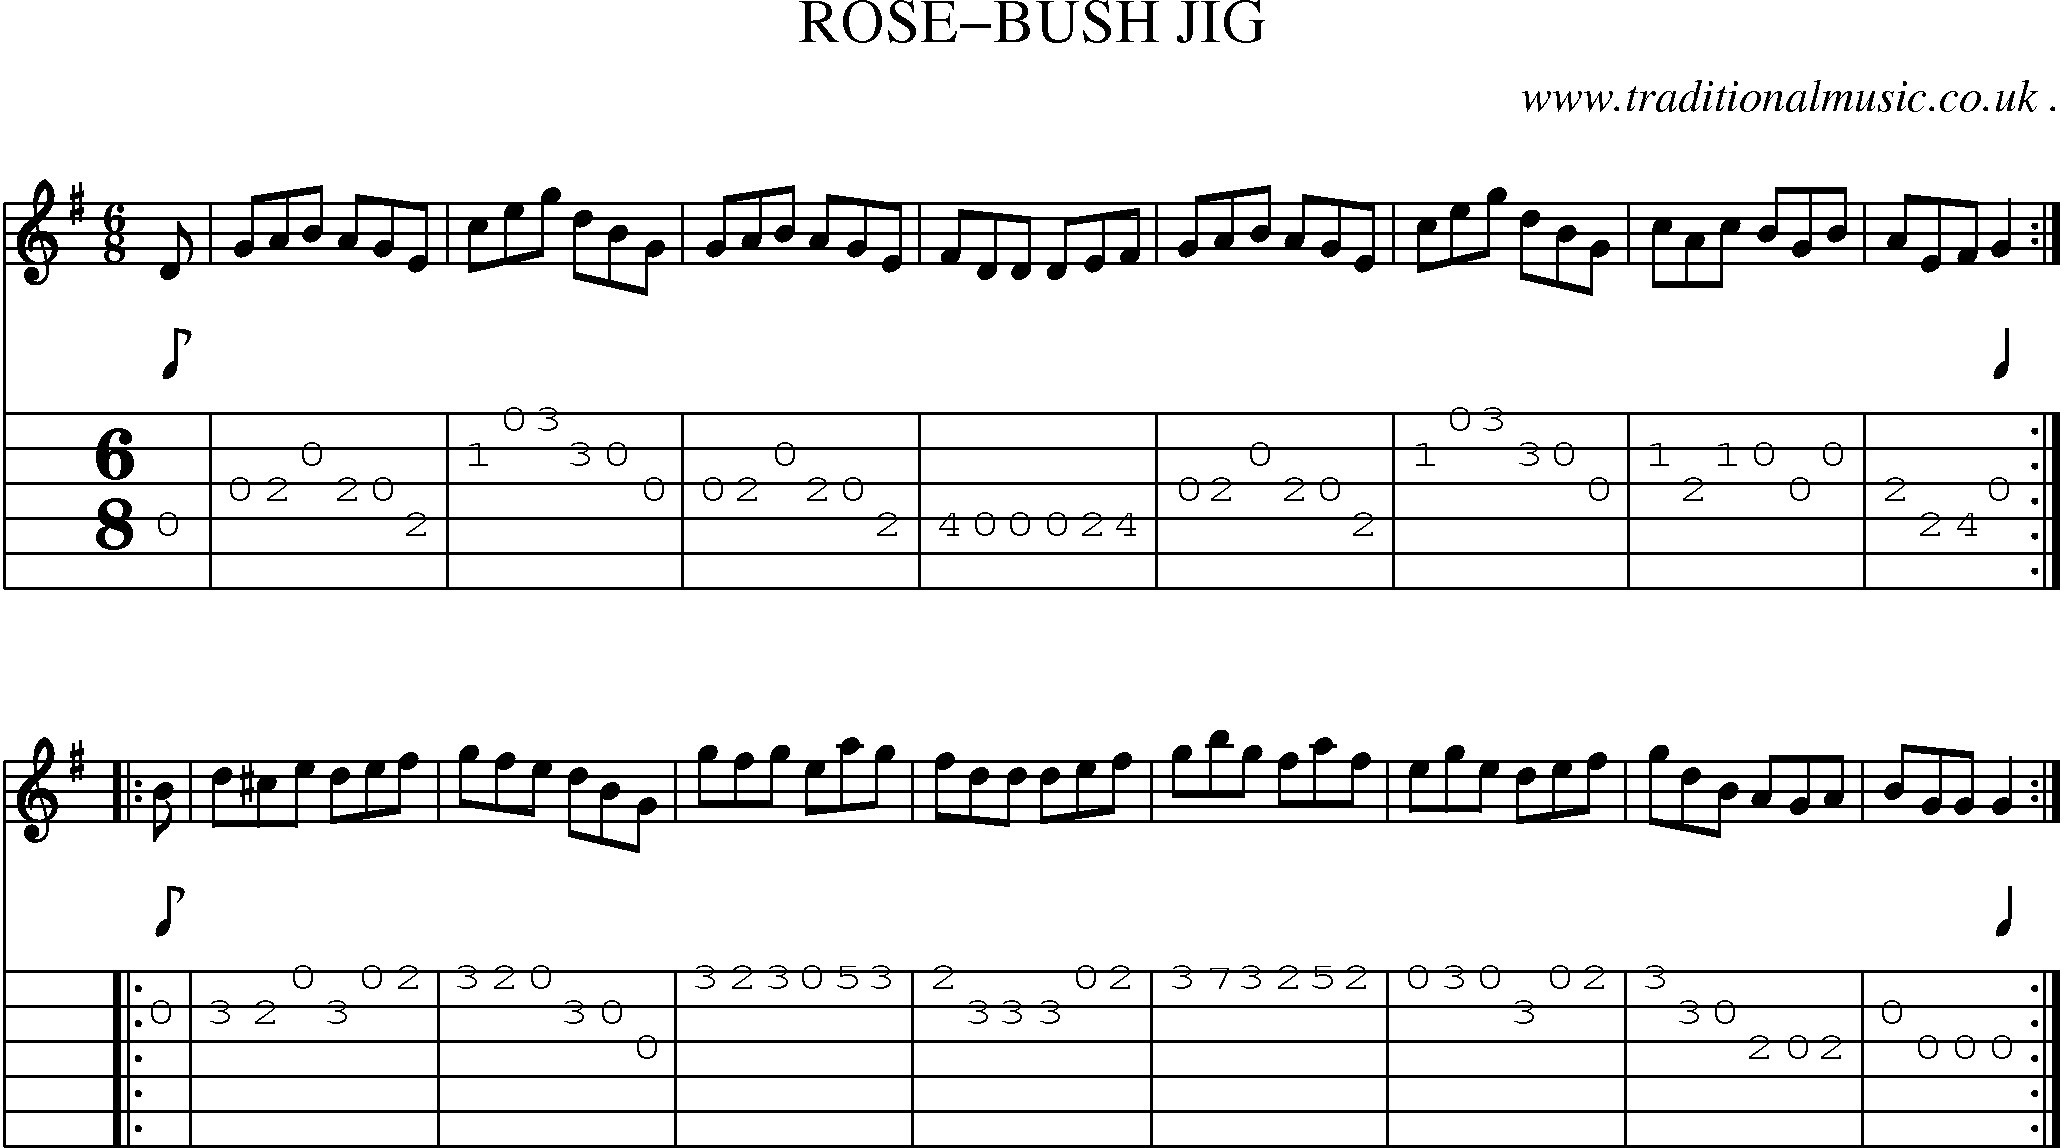 Sheet-Music and Guitar Tabs for Rose-bush Jig